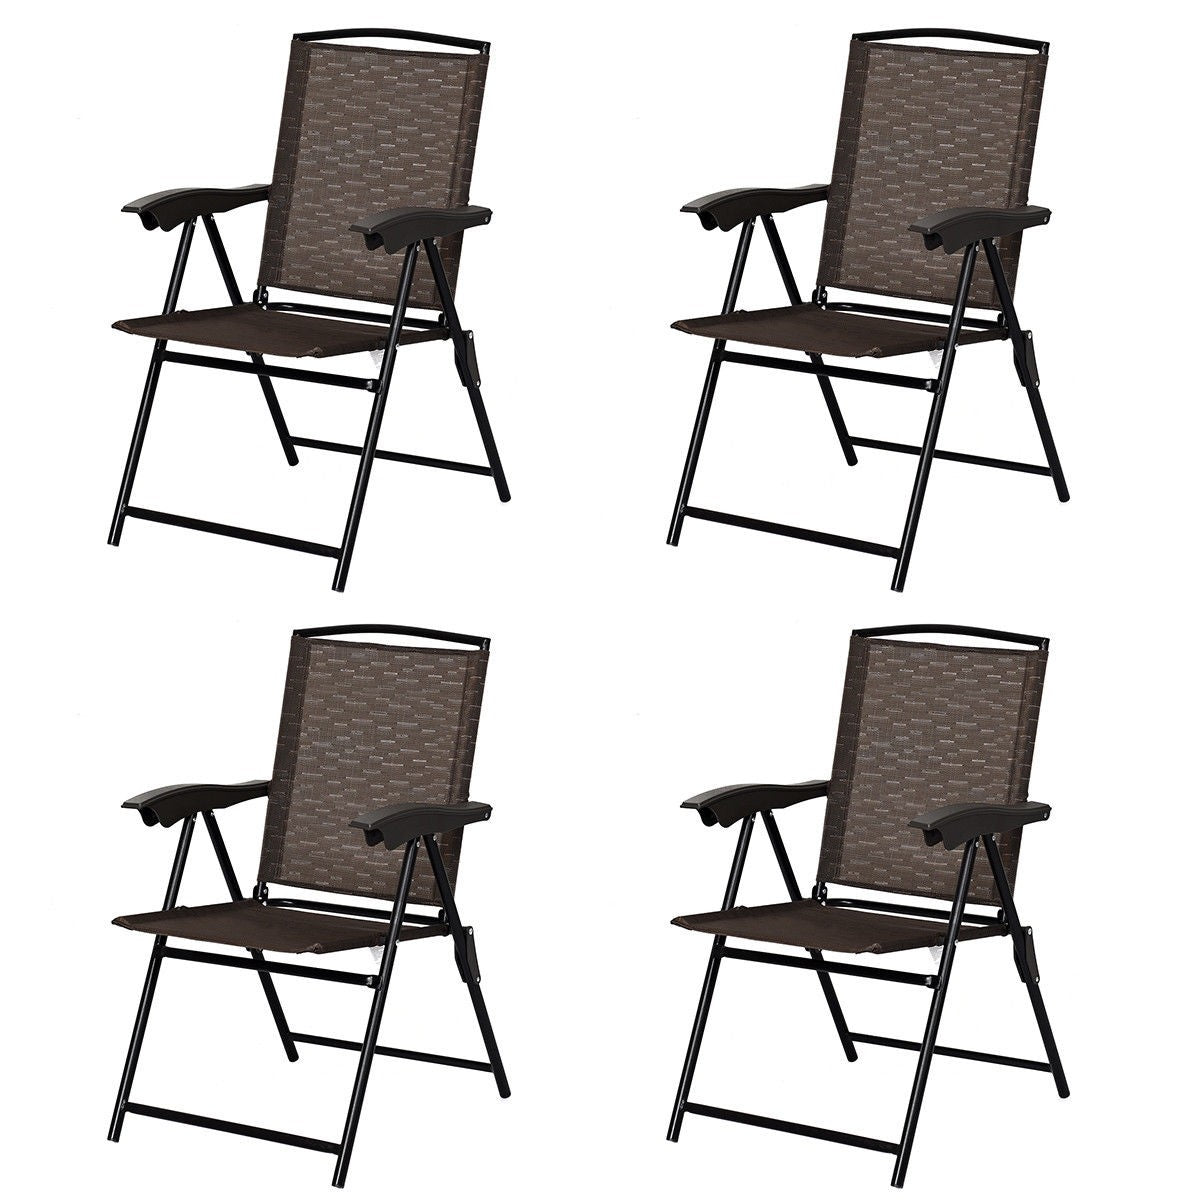 Giantex 2 Pack Patio Dining Chairs, Adjustable Sling Back Chairs with Armrest, Folding Patio Chairs